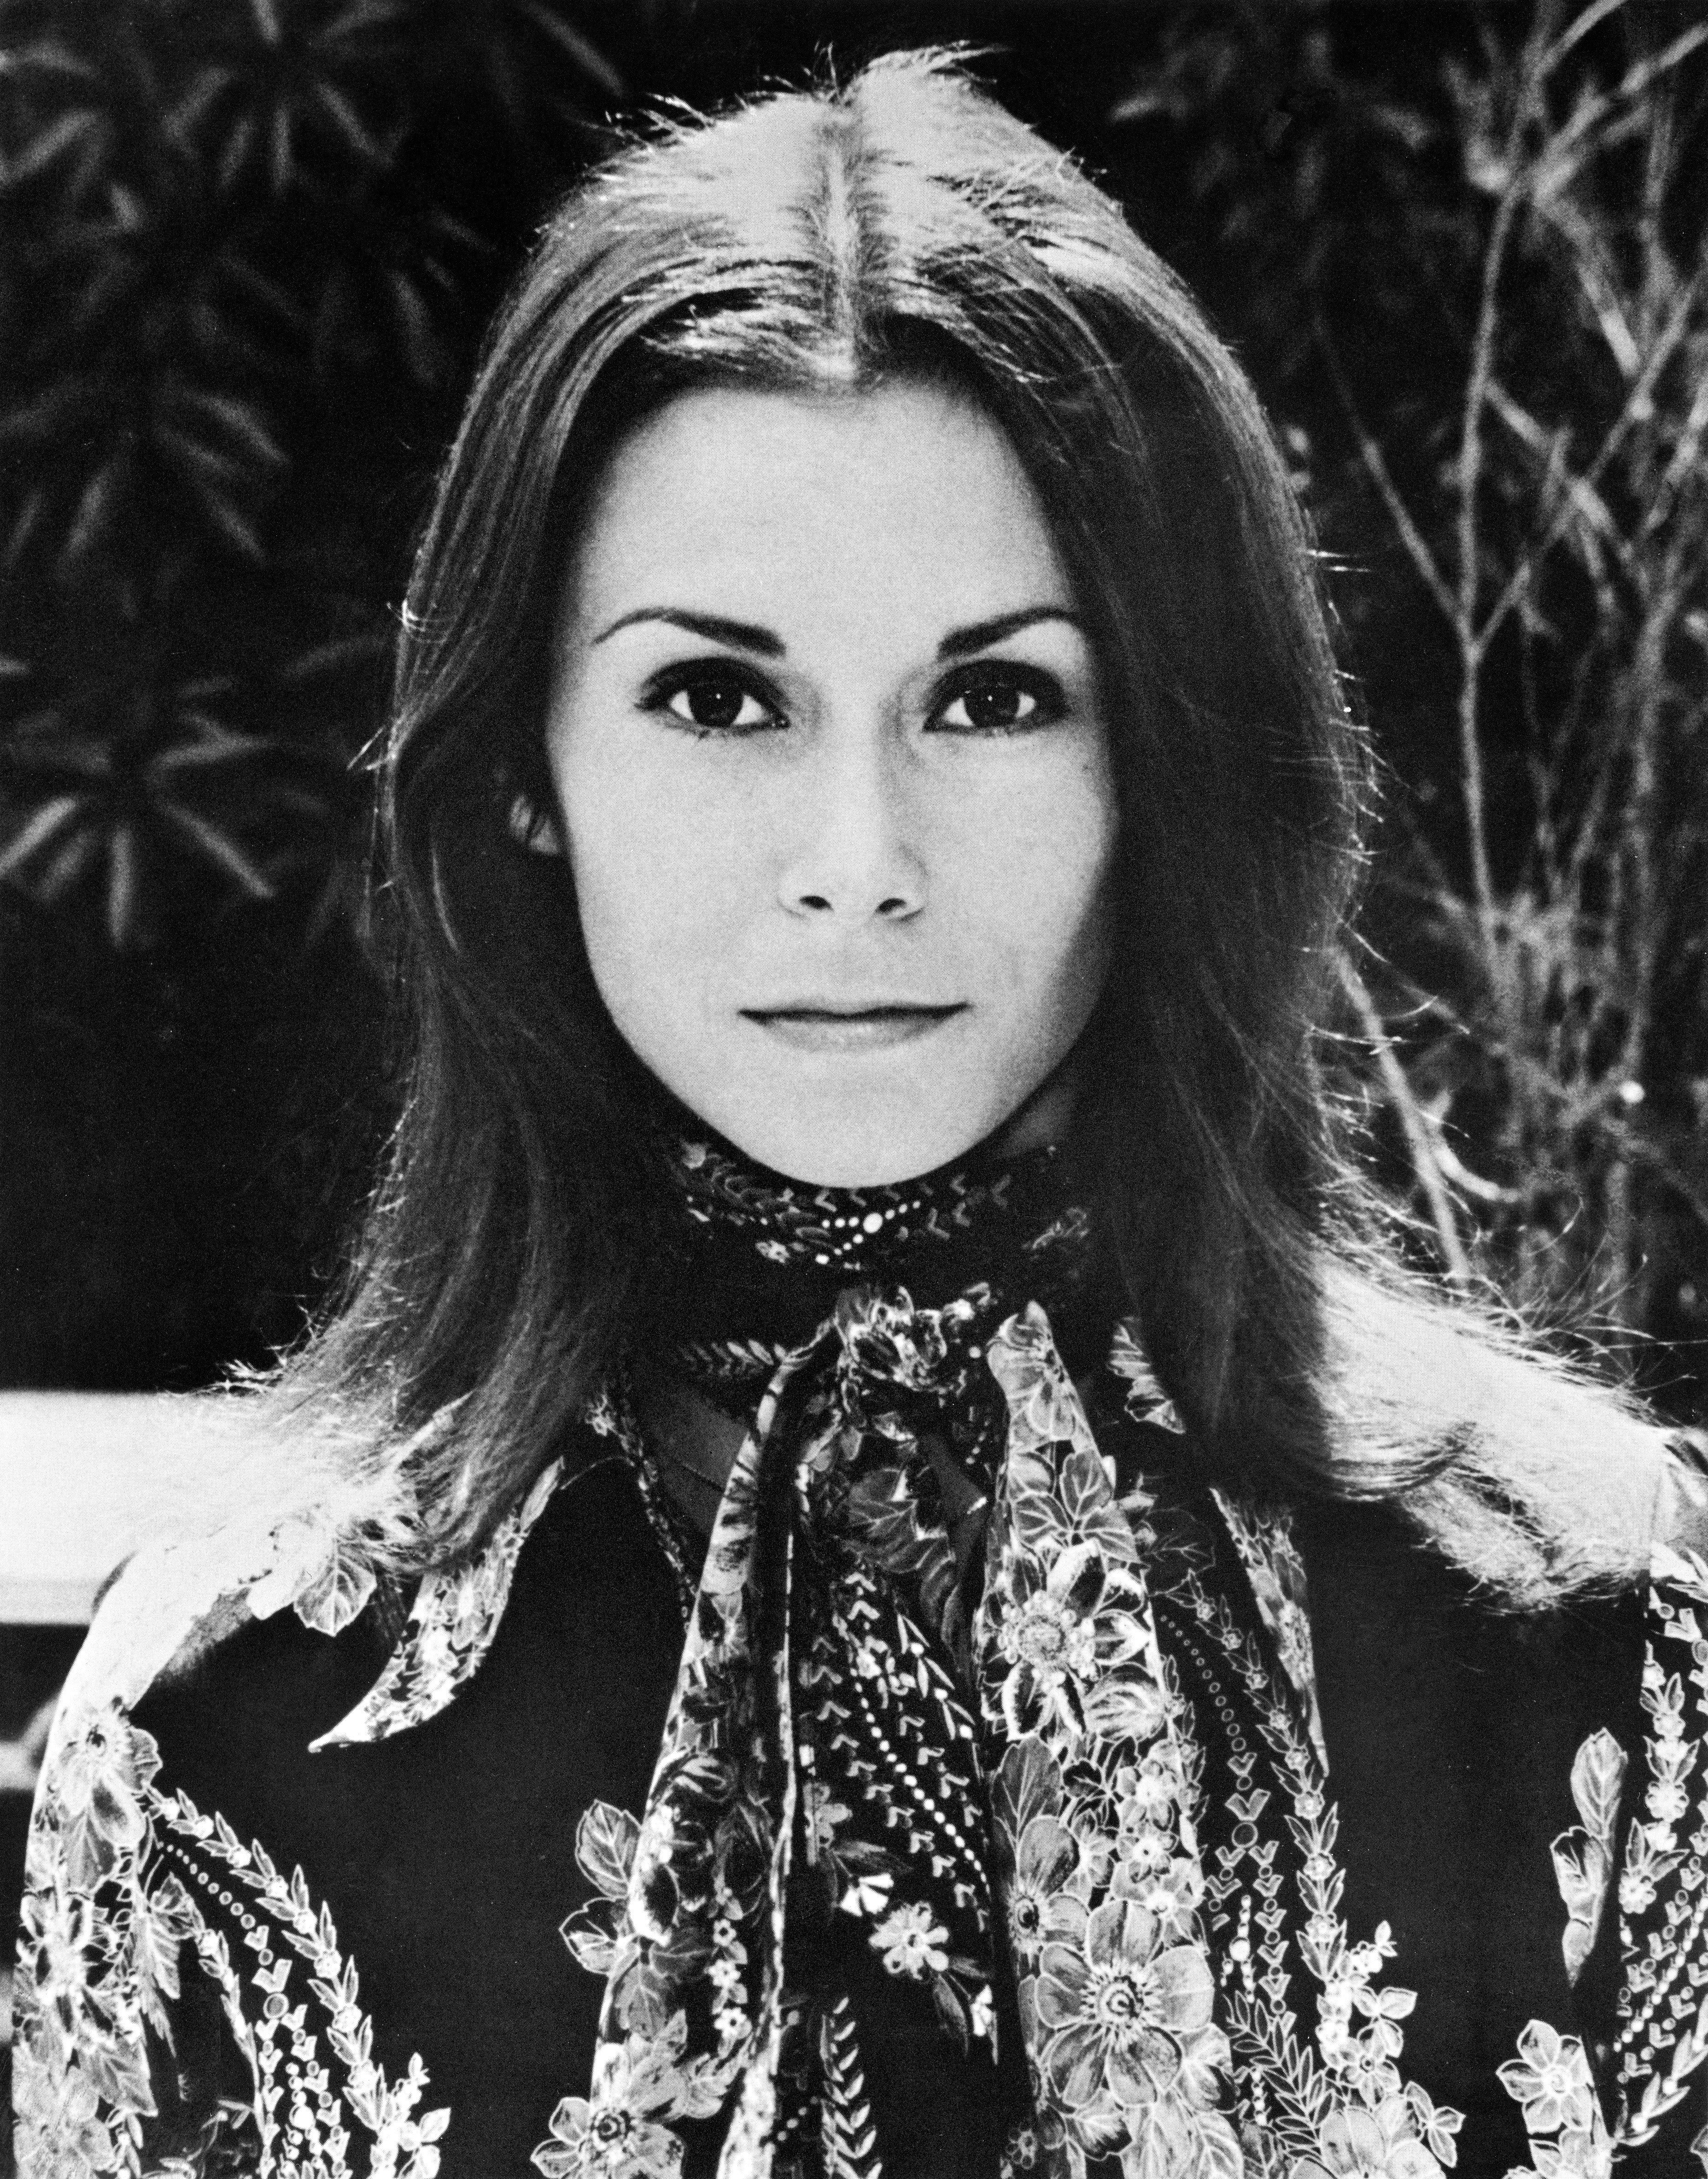 A publicity portrait of Kate Jackson for the drama series, "Charlie's Angels" in 1976. / Source: Getty Images